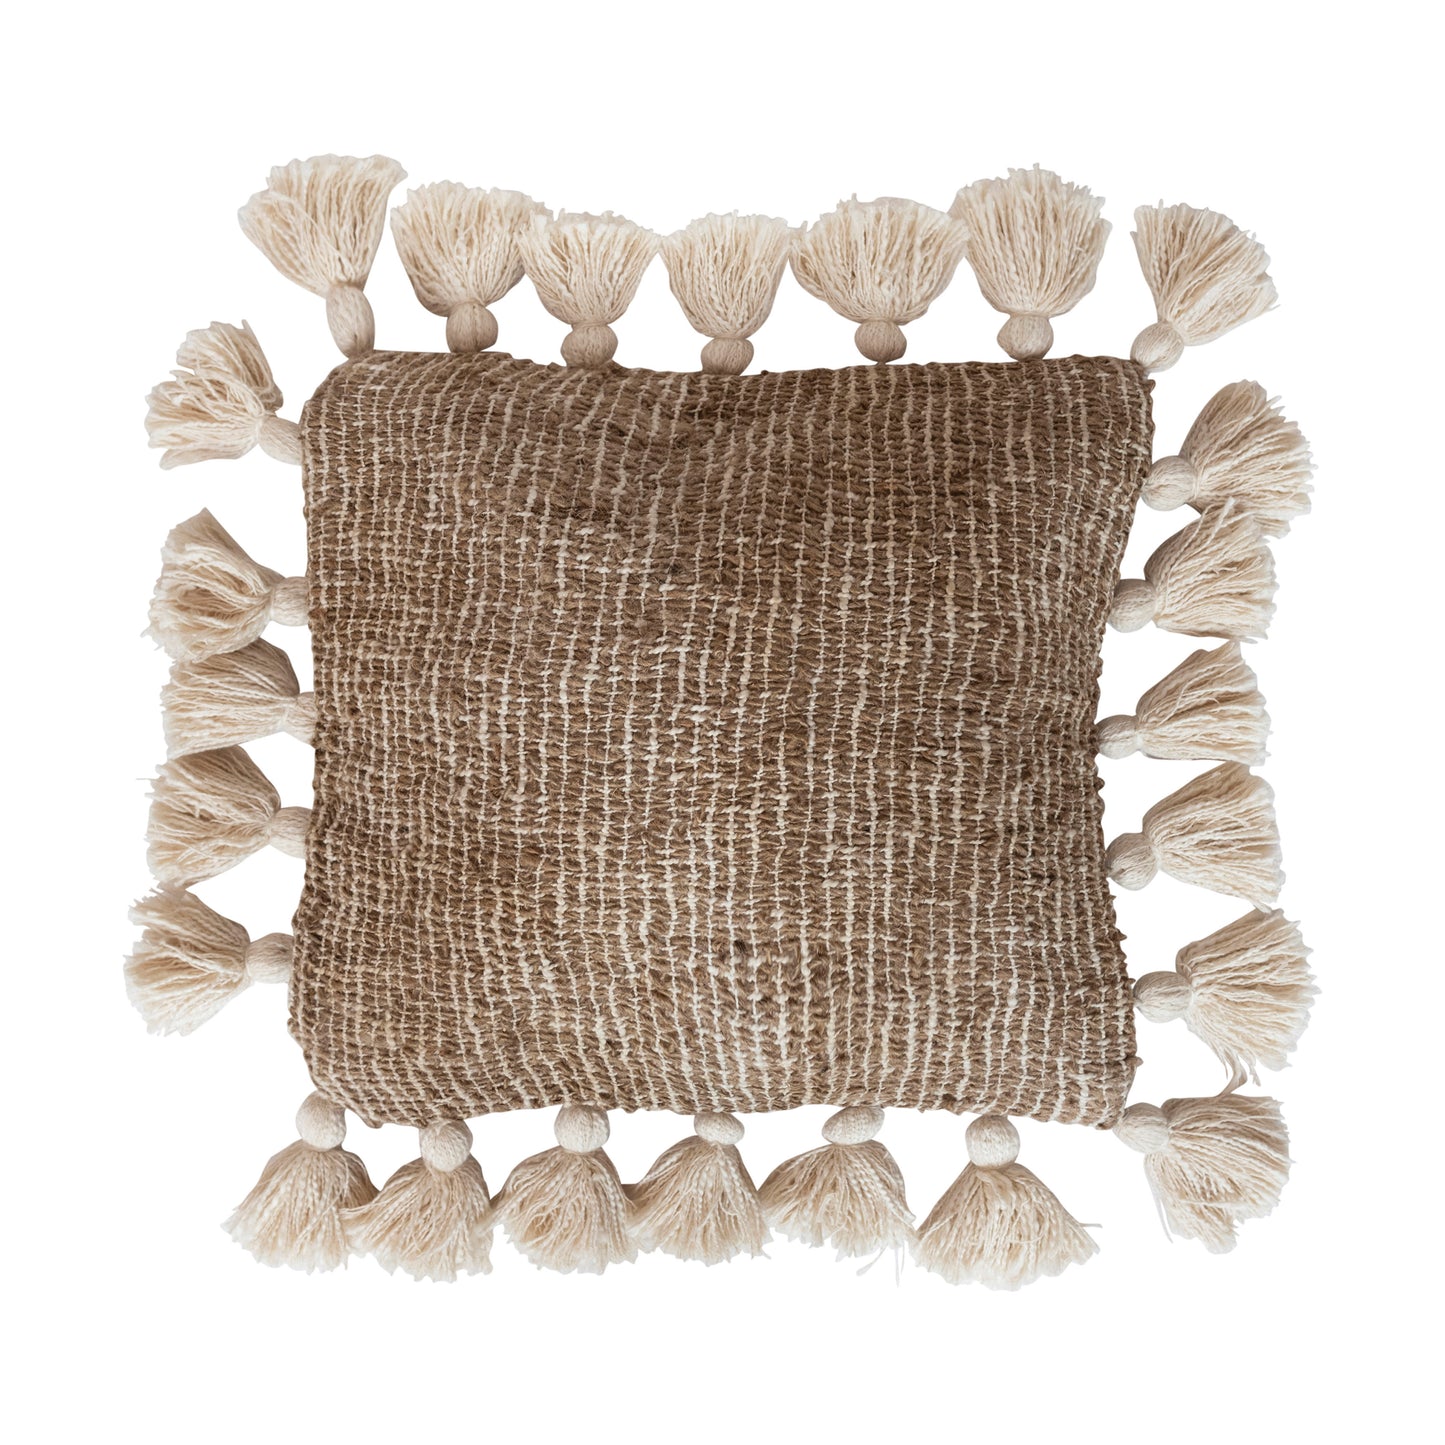 Woven cotton and jute pillow